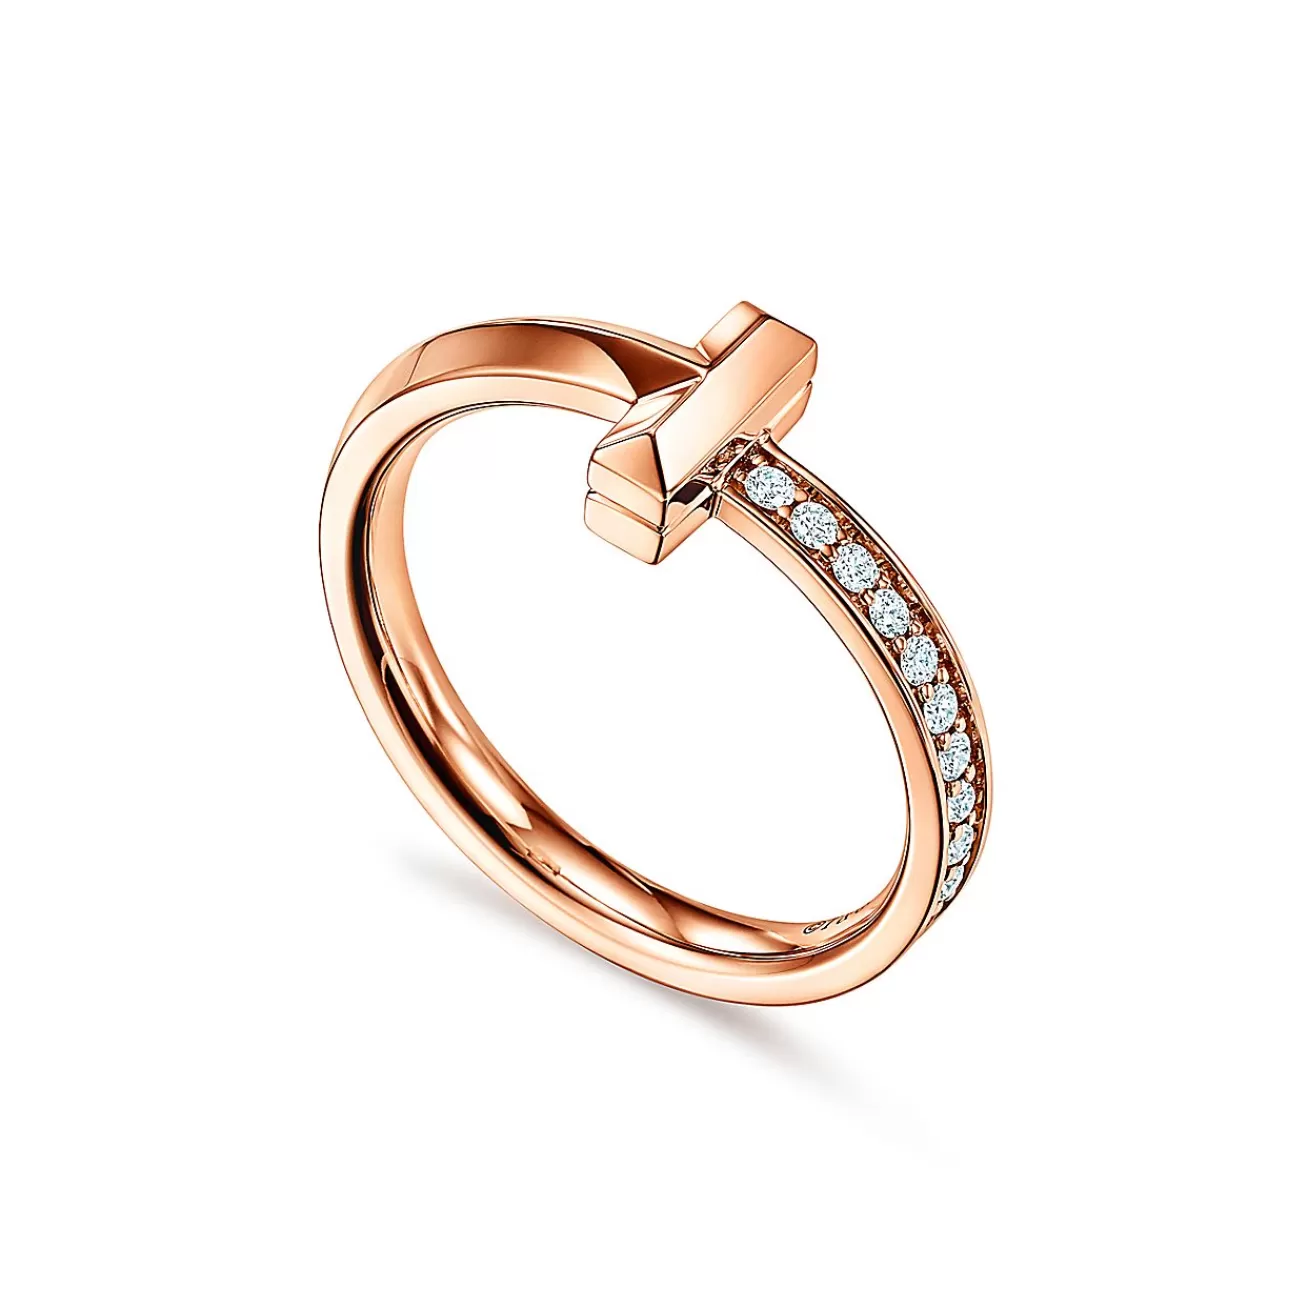 Tiffany & Co. Tiffany T T1 Ring in Rose Gold with Diamonds, 2.5 mm | ^ Rings | Men's Jewelry